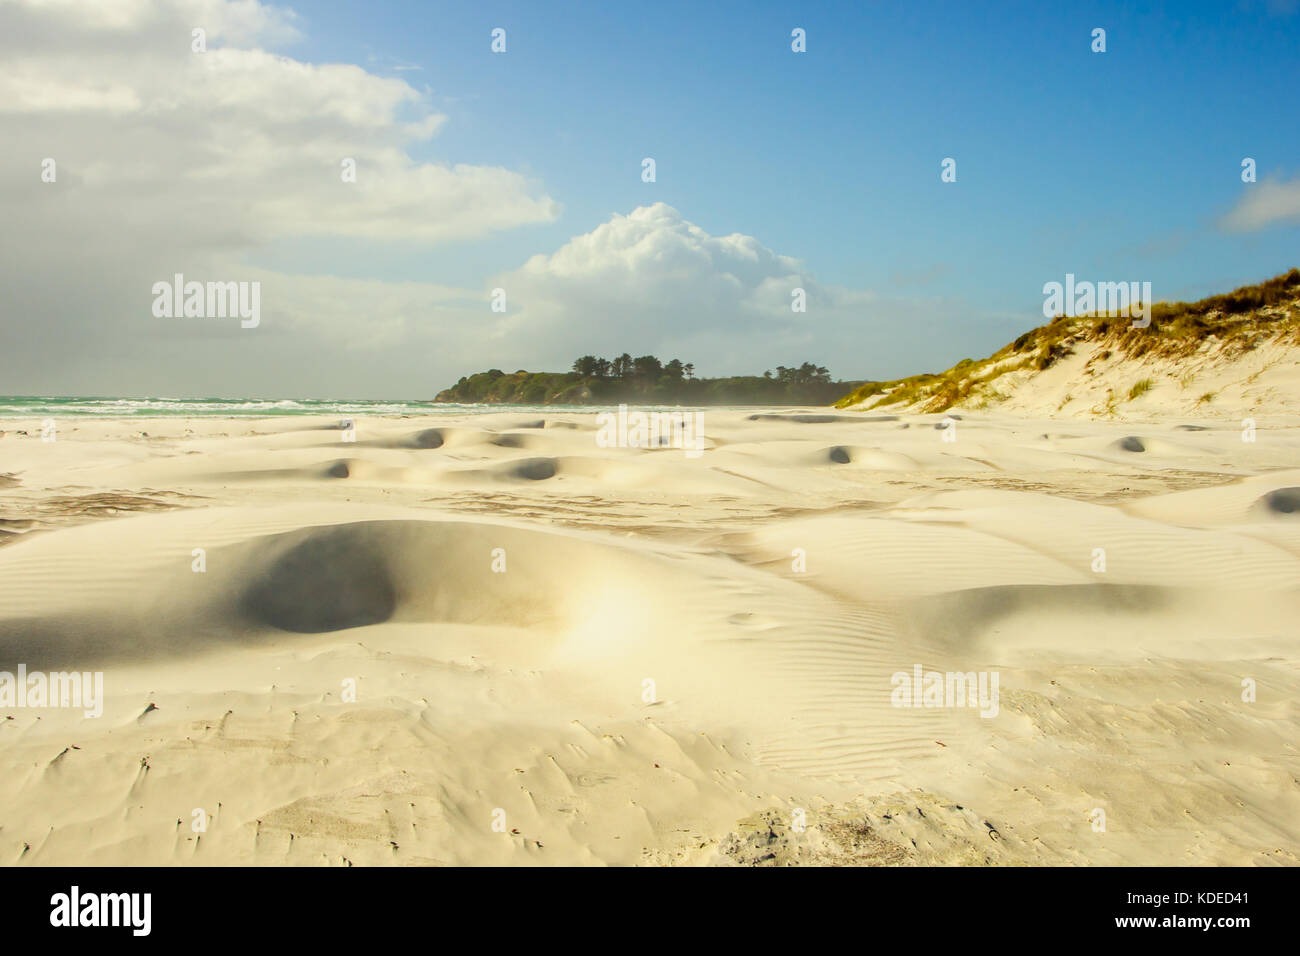 Beach and landscape in the Aupouri Peninsula, in Northland, New Zealand Stock Photo